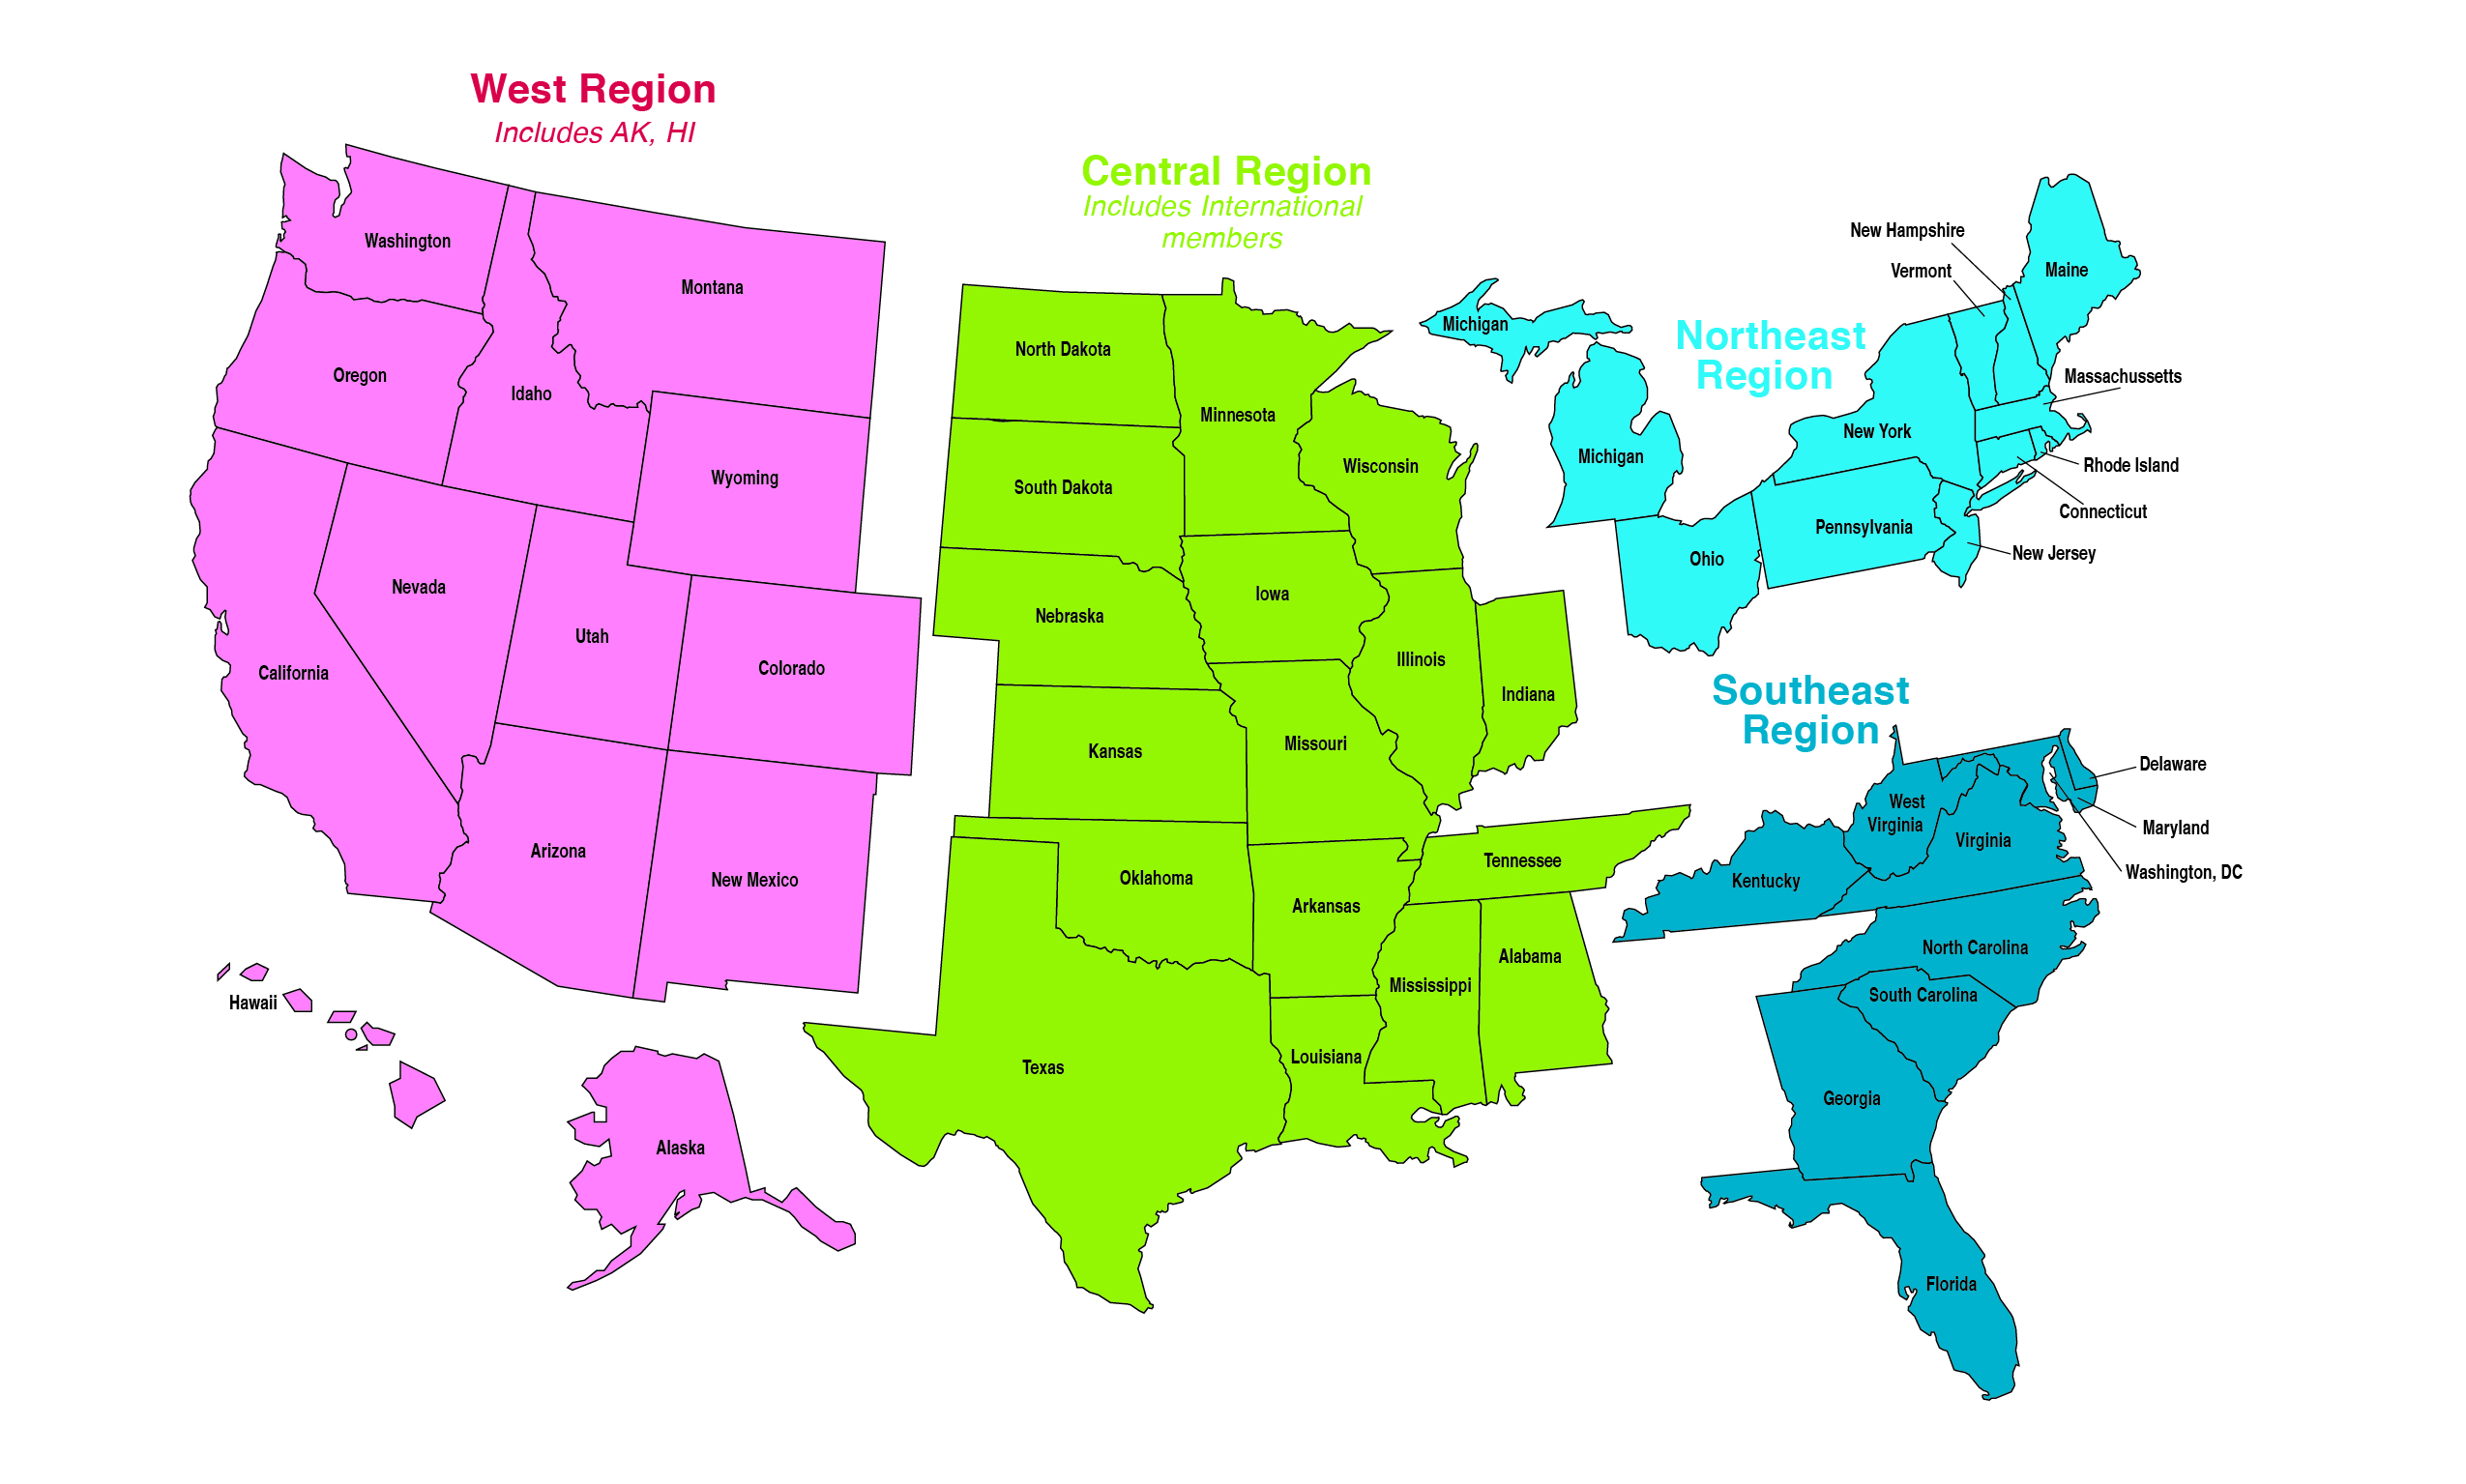 Mx region. Us Regions. How many Regions in the USA. The Northeast Region States. The Northeast Region in the USA.